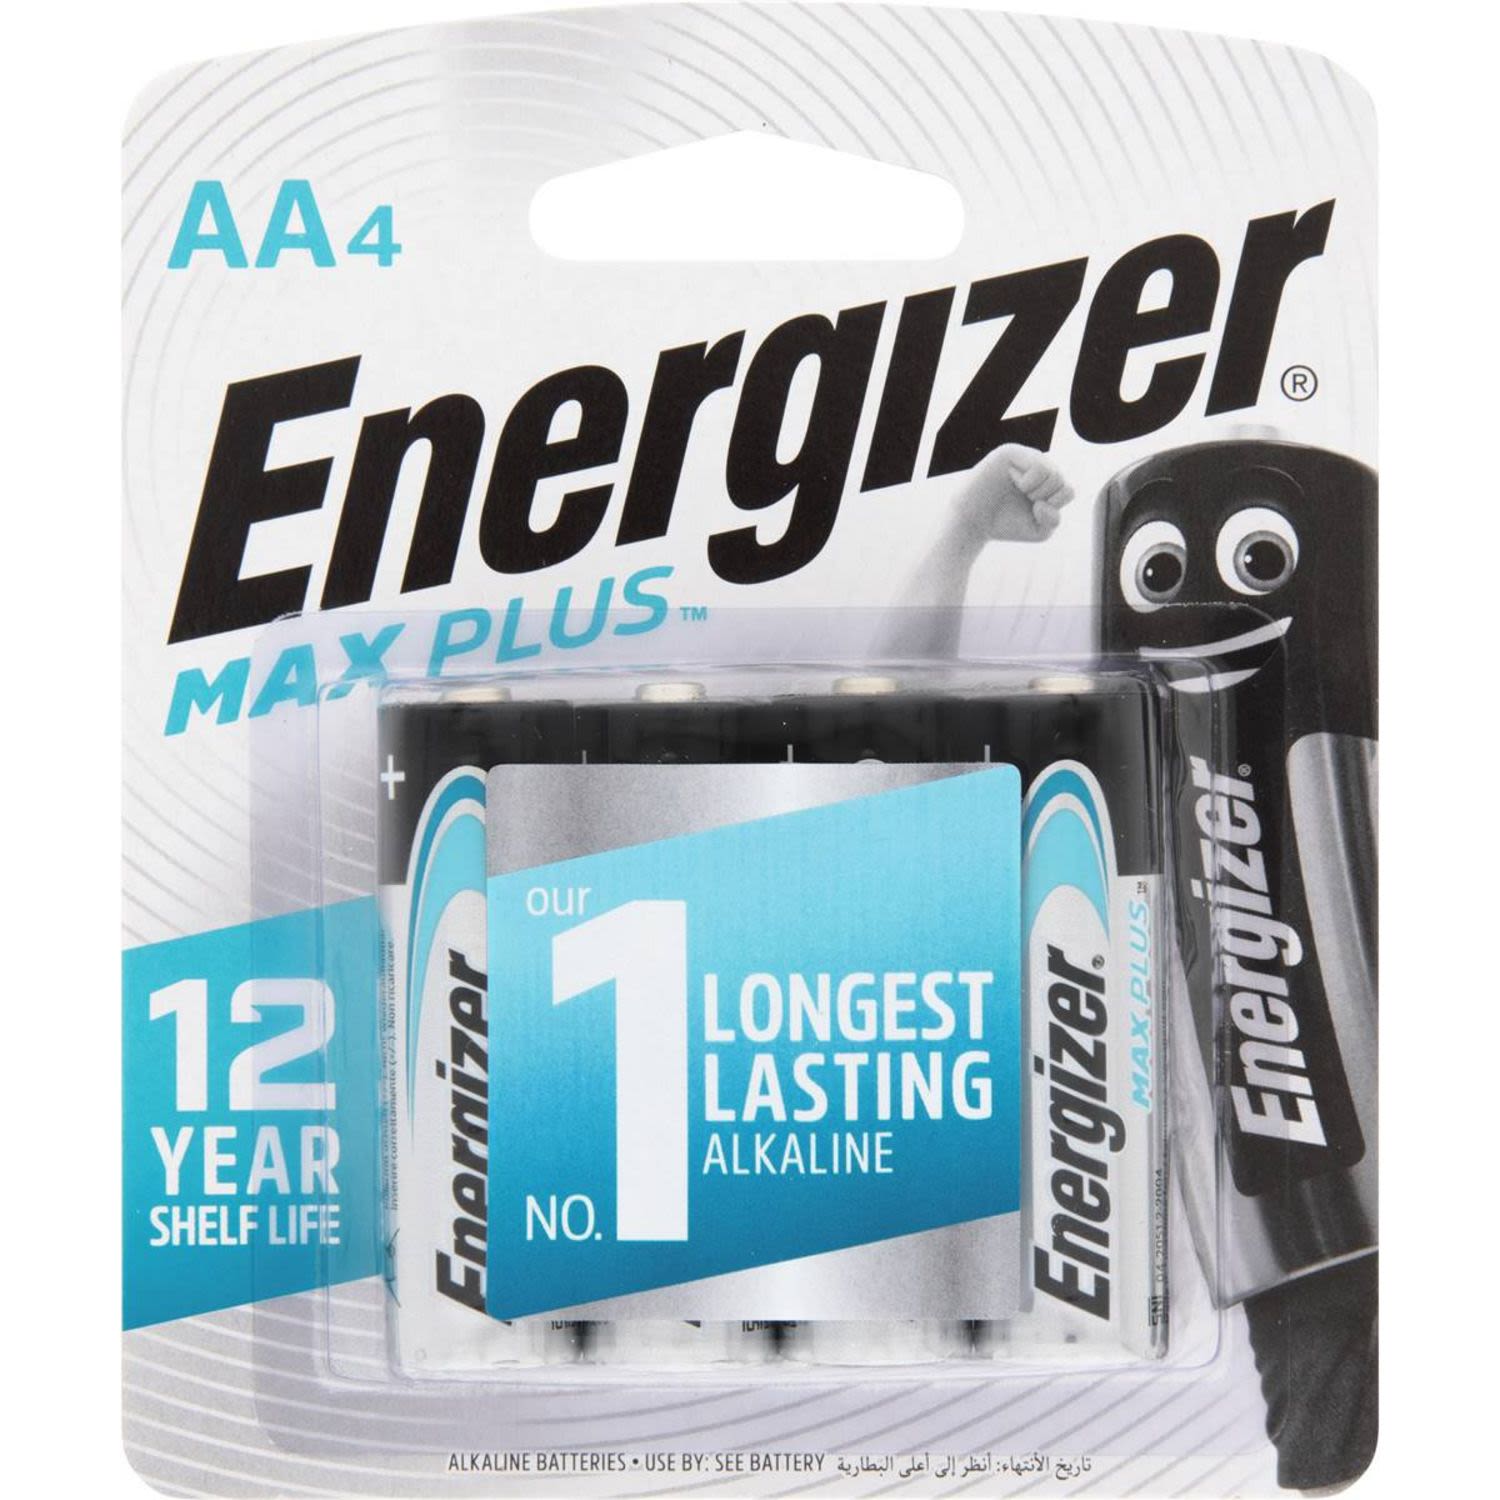 Long-lasting power and innovation are what Energizer MAX PLUS is all about. Energizer MAX PLUS batteries hold power for up to 12 years while in storage, so you have power when you need it most. Your most demanding devices, like cameras, personal groomers, and handheld games and controllers, stay powered up with the long-lasting energy you expect from Energizer<br /> <br />